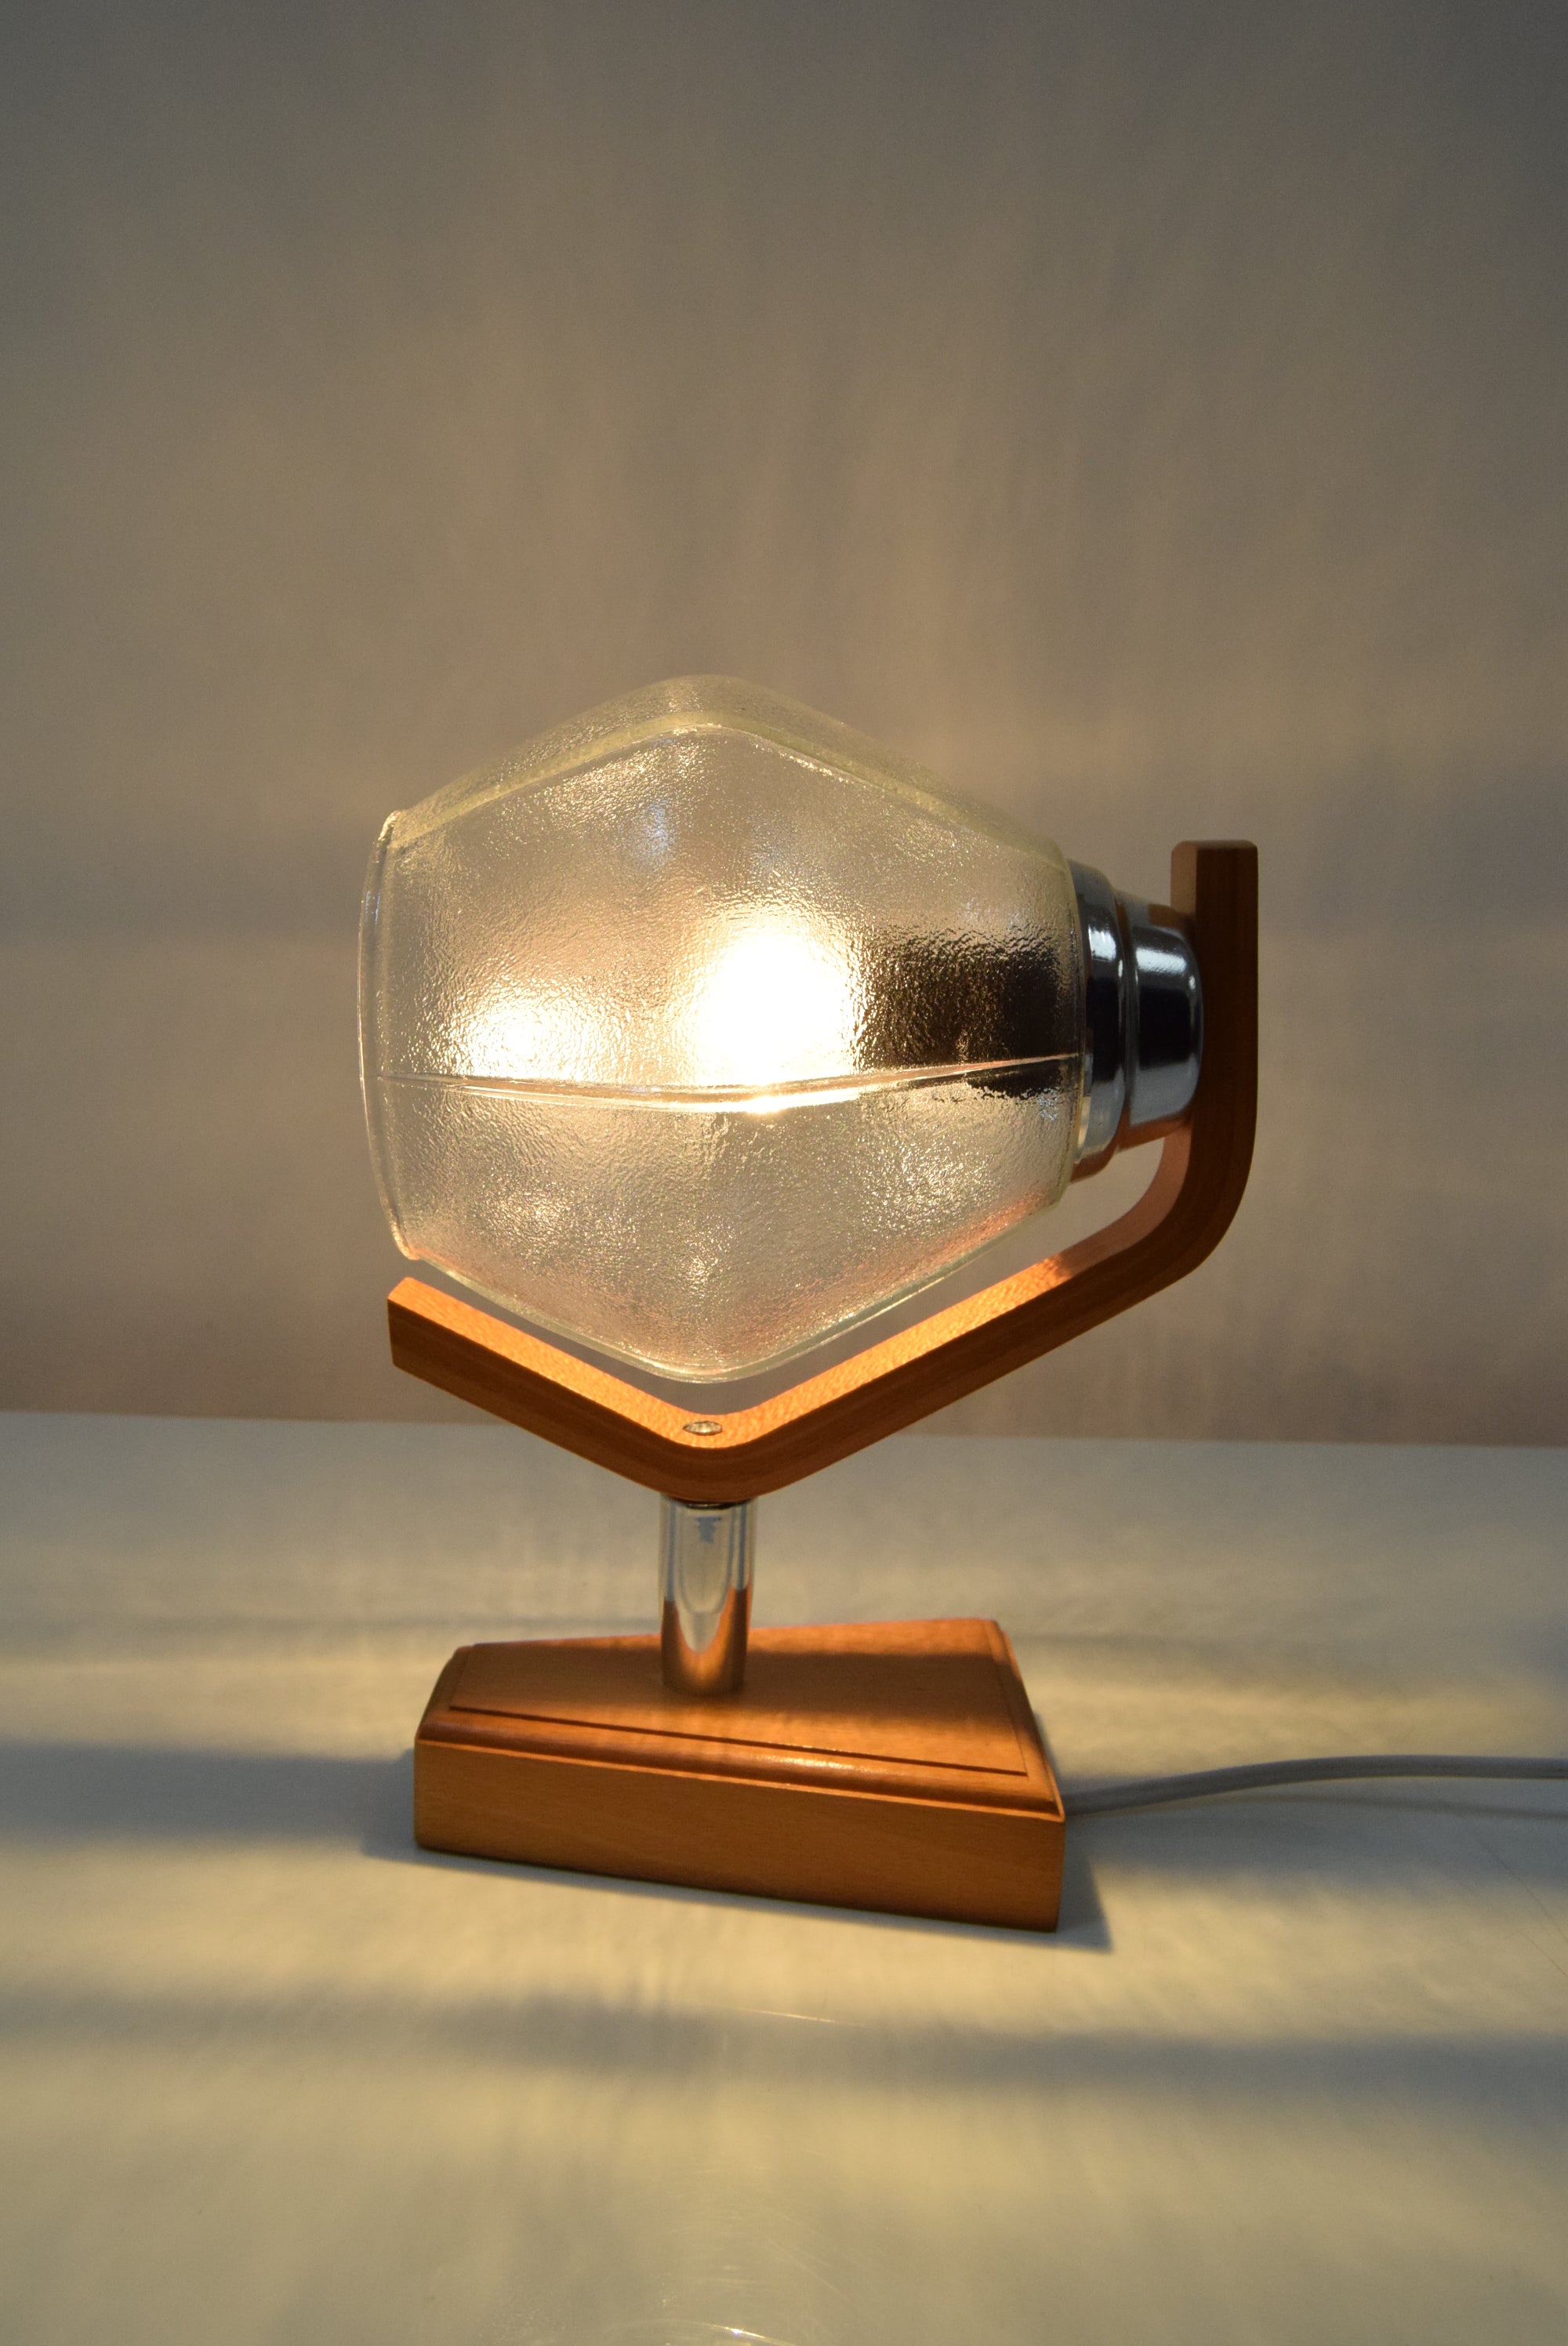 Made in Czechoslovakia.
Made of glass, wood.
New cabling.
1x60W,E27 or E26 bulb
Re-polished
Original condition.
US adapter included.